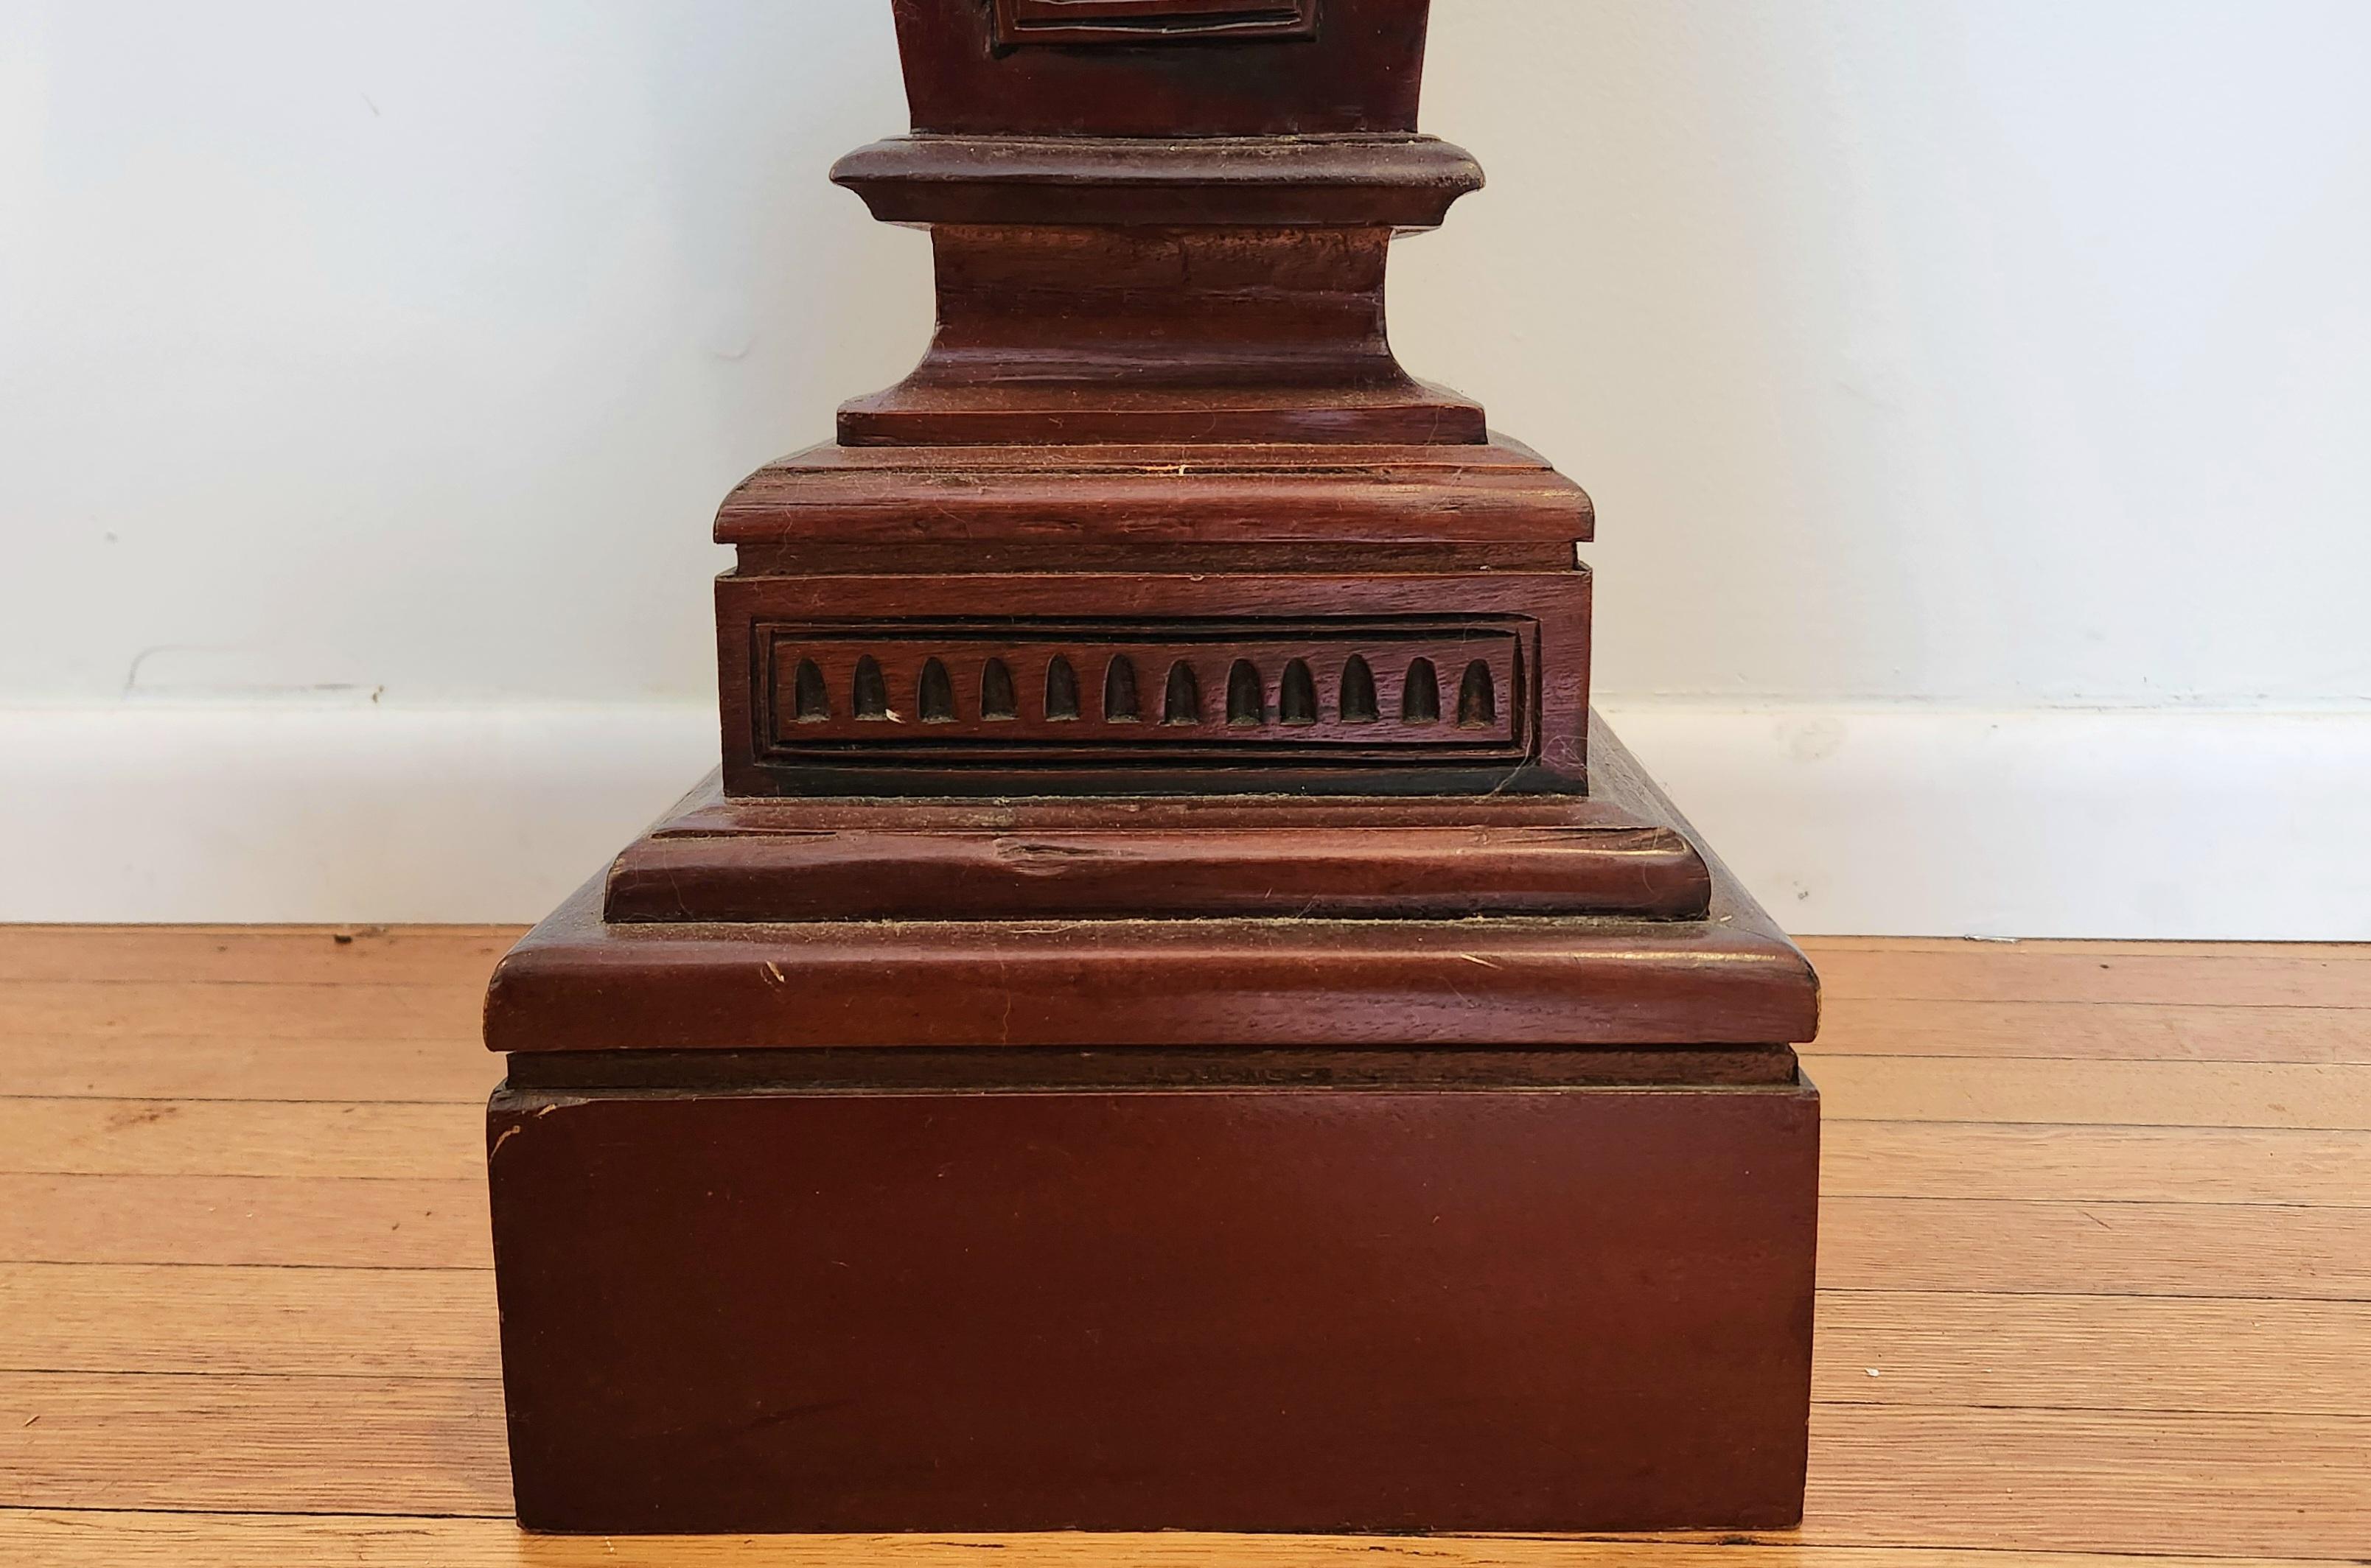 This beautiful mahogany pedestal is a wonderful example of the neoclassical style. It has detailed carvings of draped tapestries that are set in frames along the edges at the top of the piece. Further down are small flowers that decorate the top